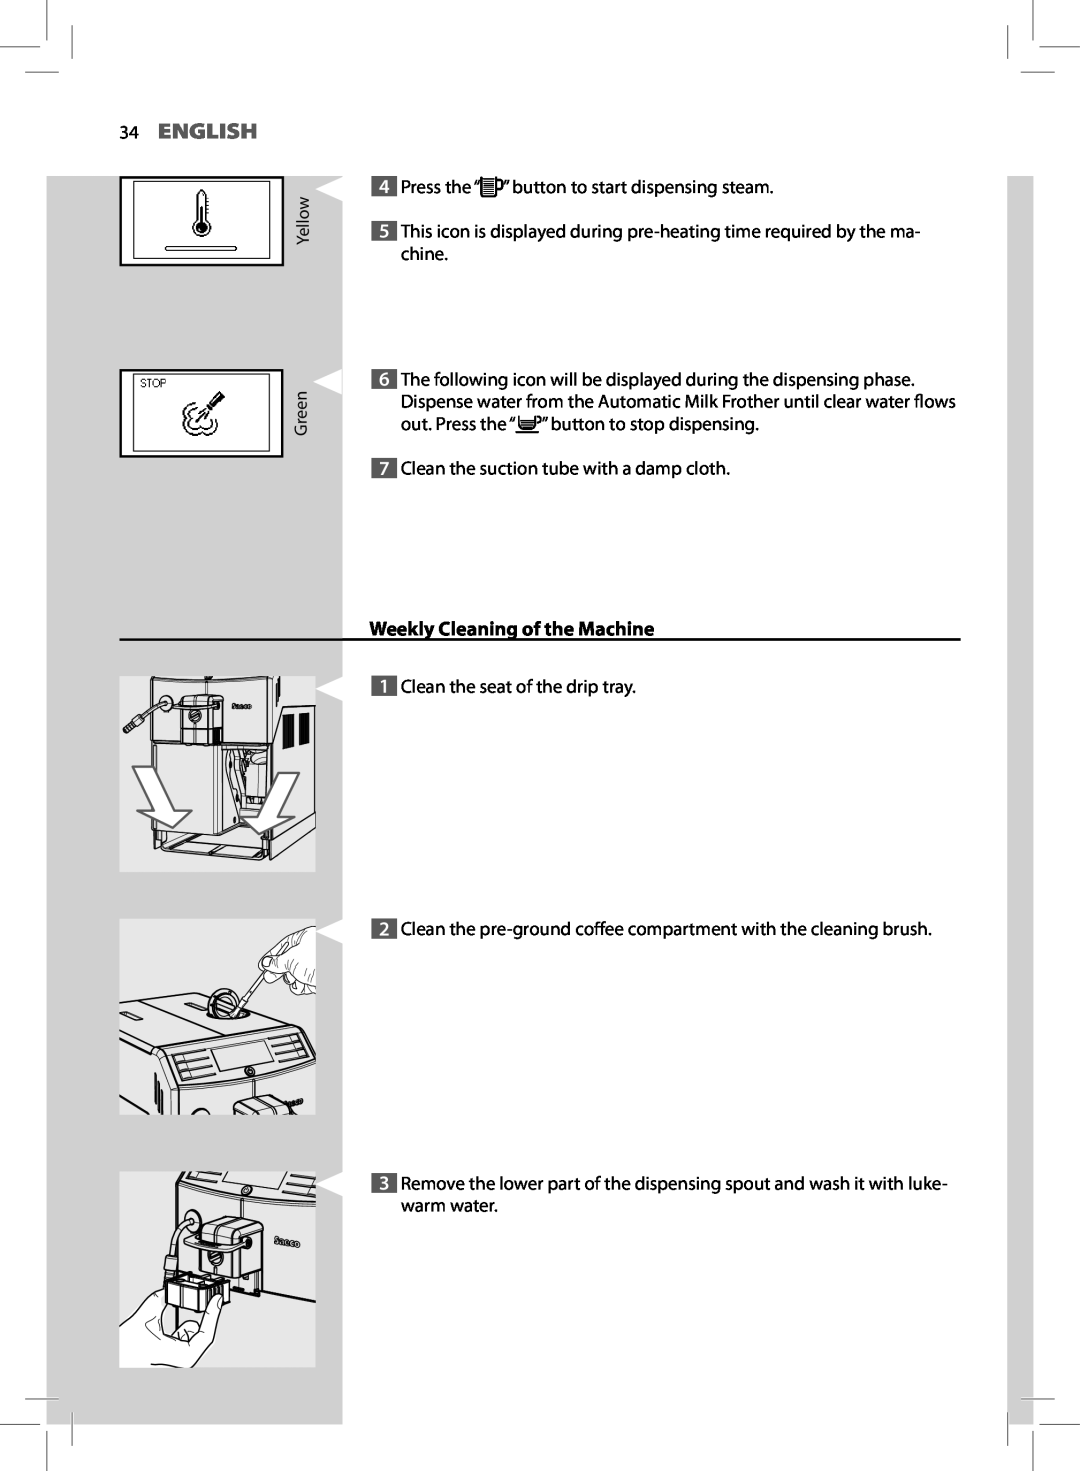 Saeco Coffee Makers HD8772 user manual English, Weekly Cleaning of the Machine 